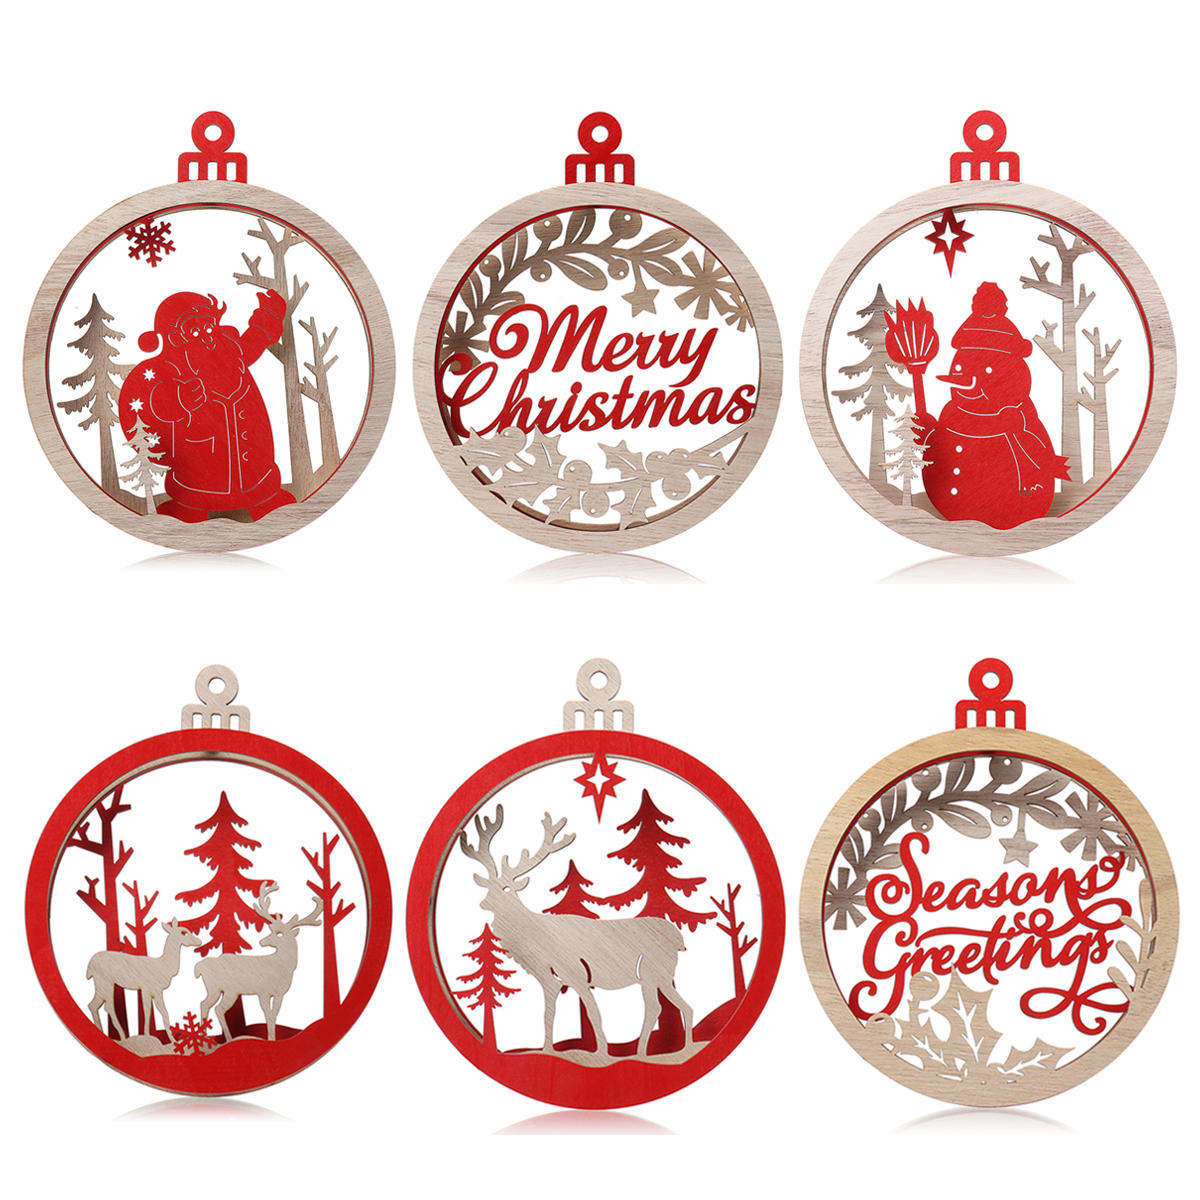 Christmas Wooden Round Hanging Tree Party Ornament Festival Home Decorations Toy